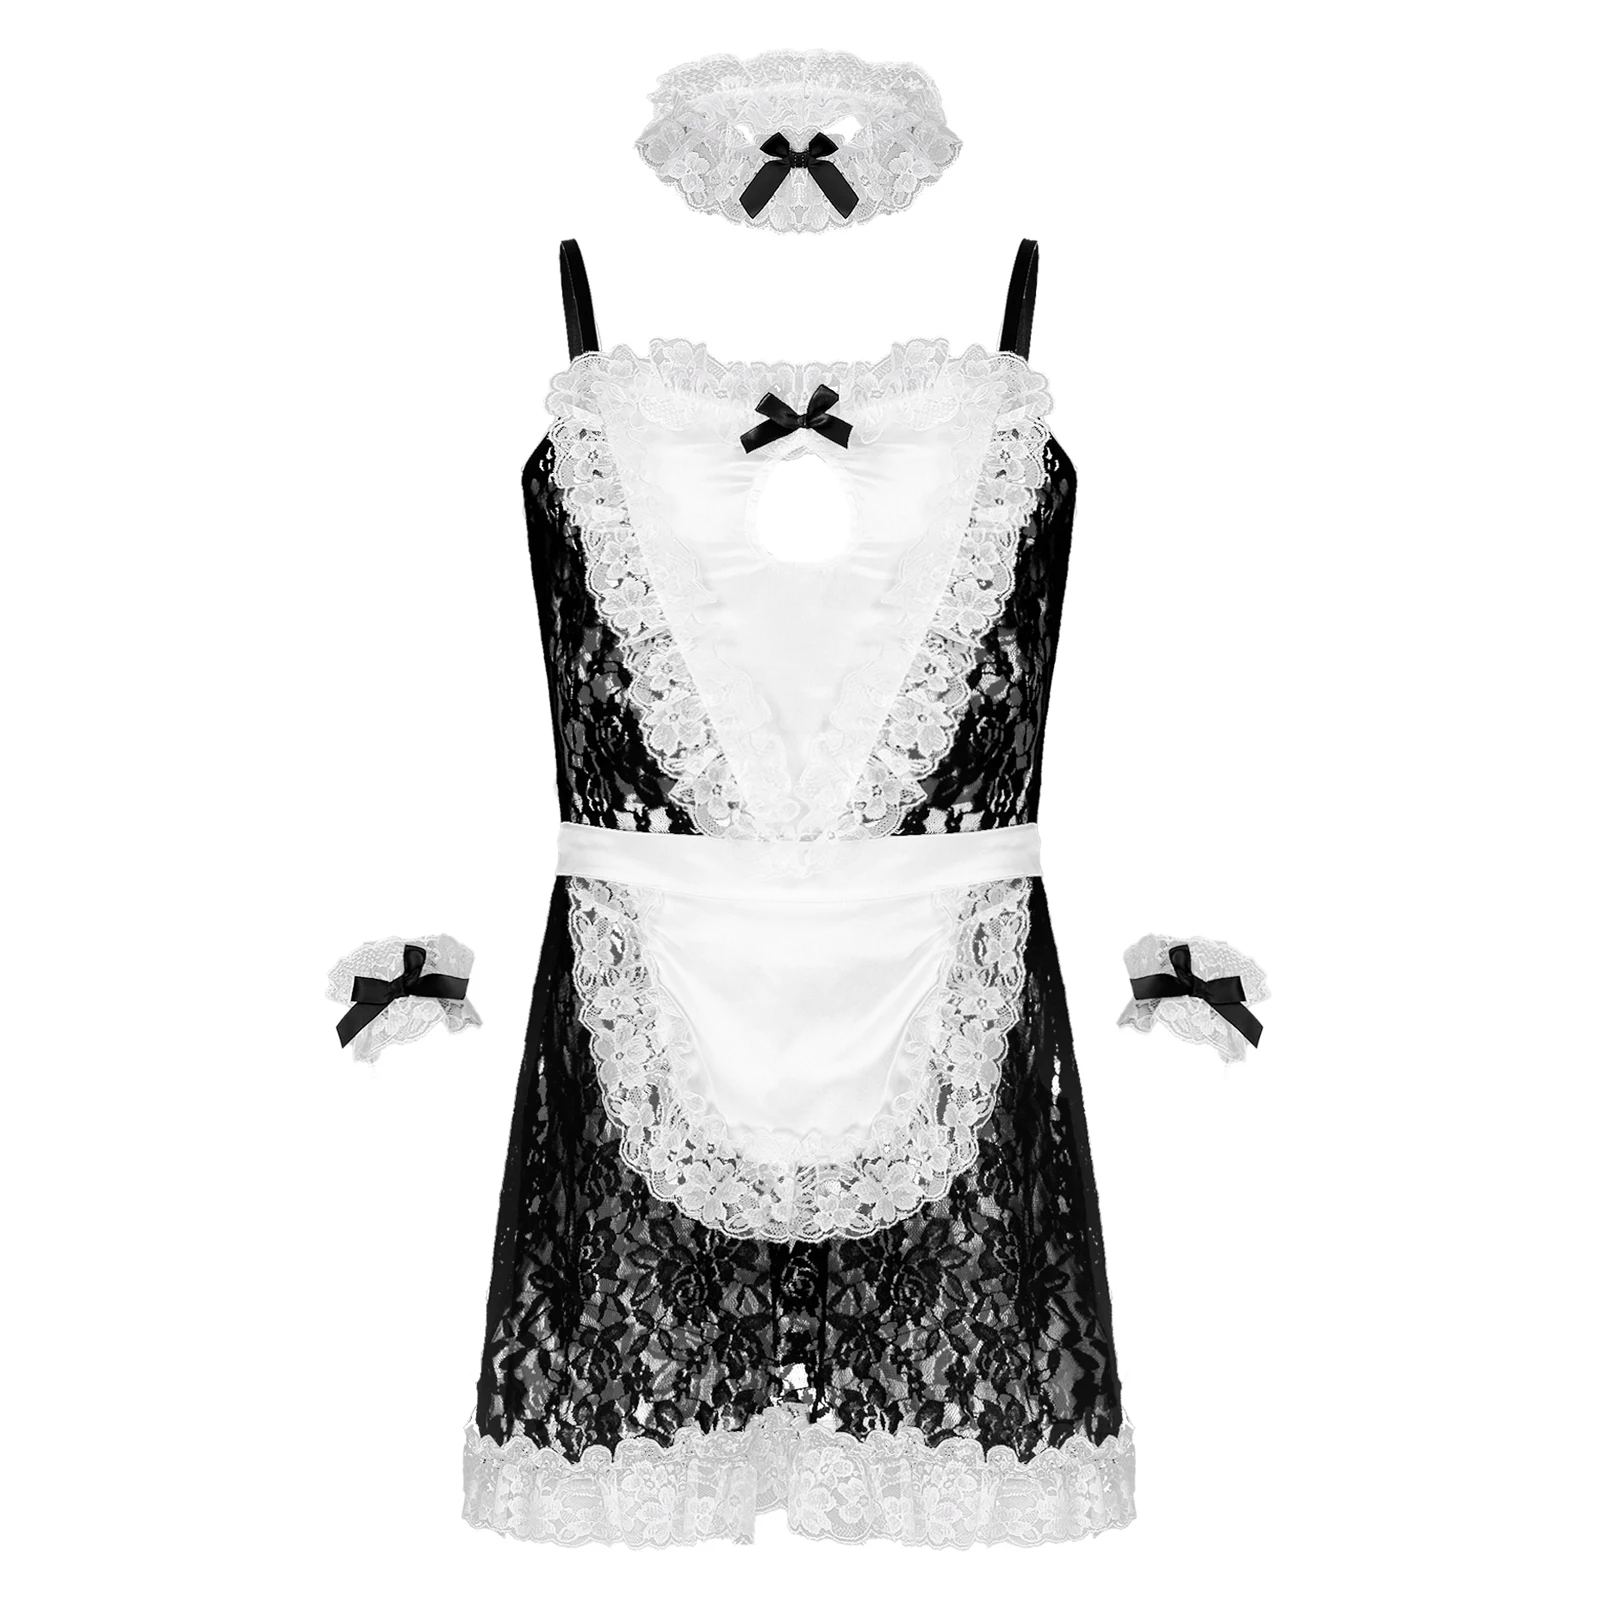 

Sissy Gay Lingerie Suit Man Erotic Costume Maid Role Play Cosplay Outfit Floral Lace Frilly Dress with Apron Neck Ring Wristband